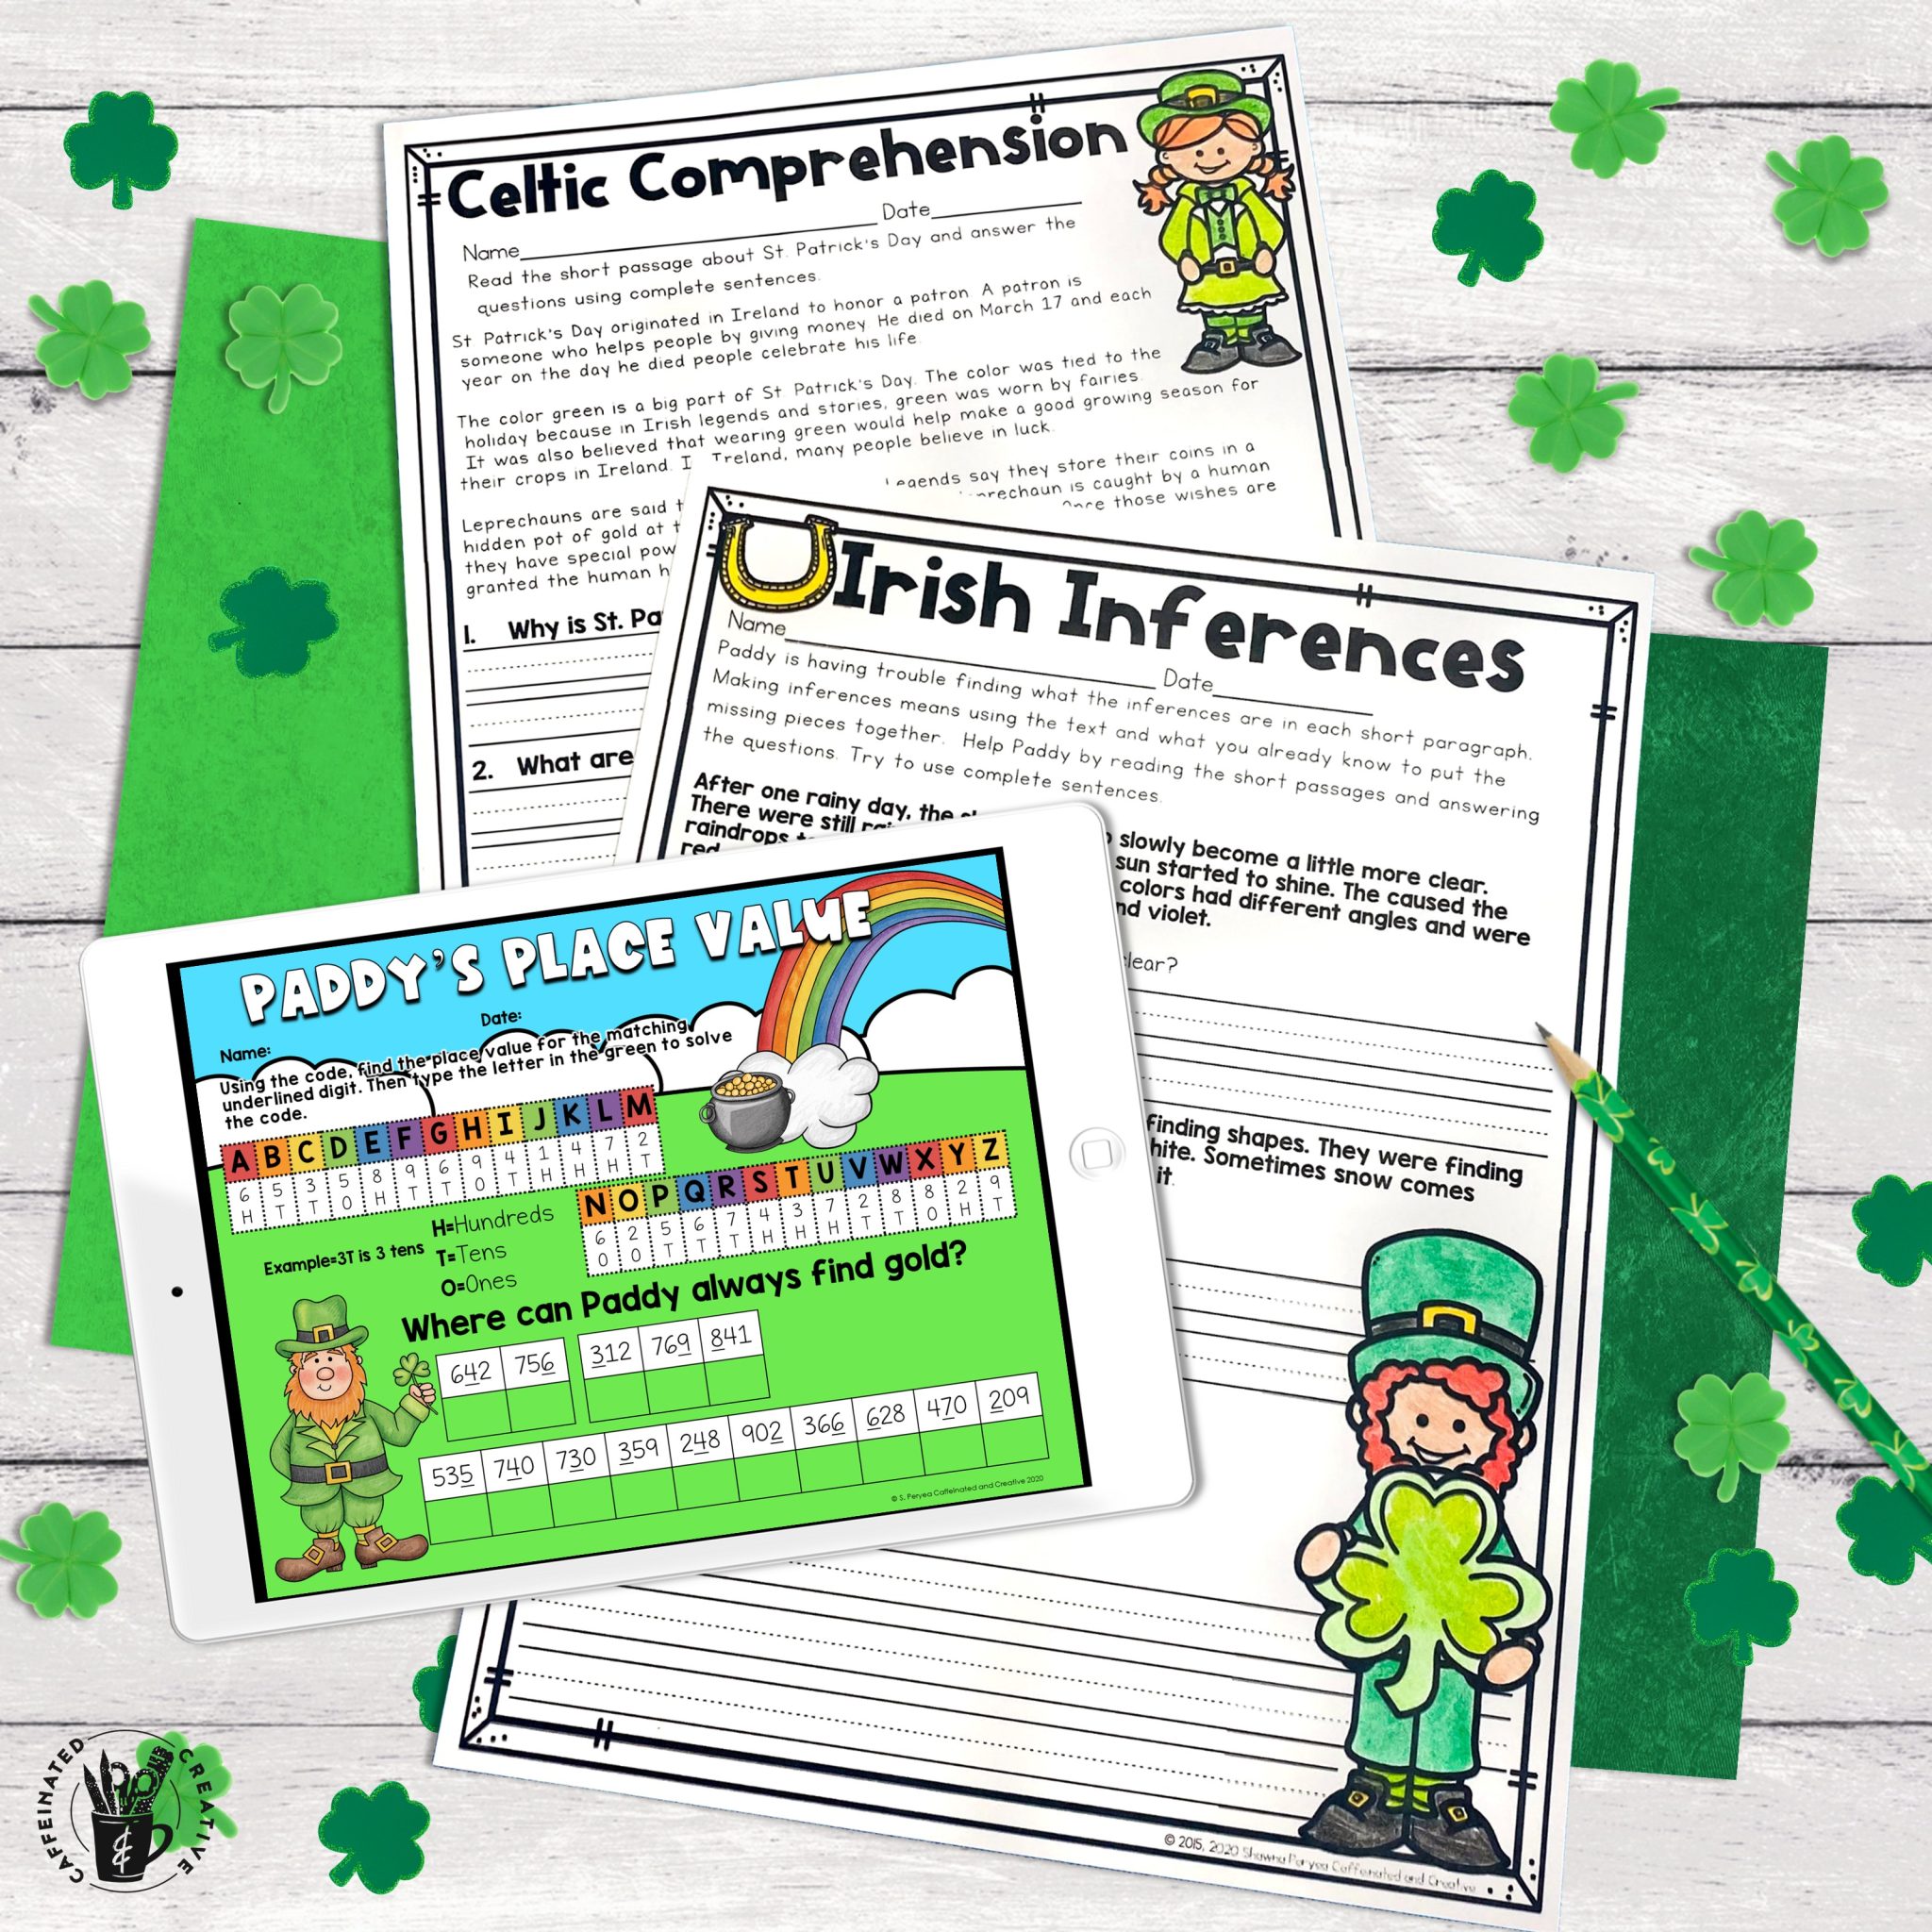 Celebrating St. Patrick's Day In The Classroom - Engage Education